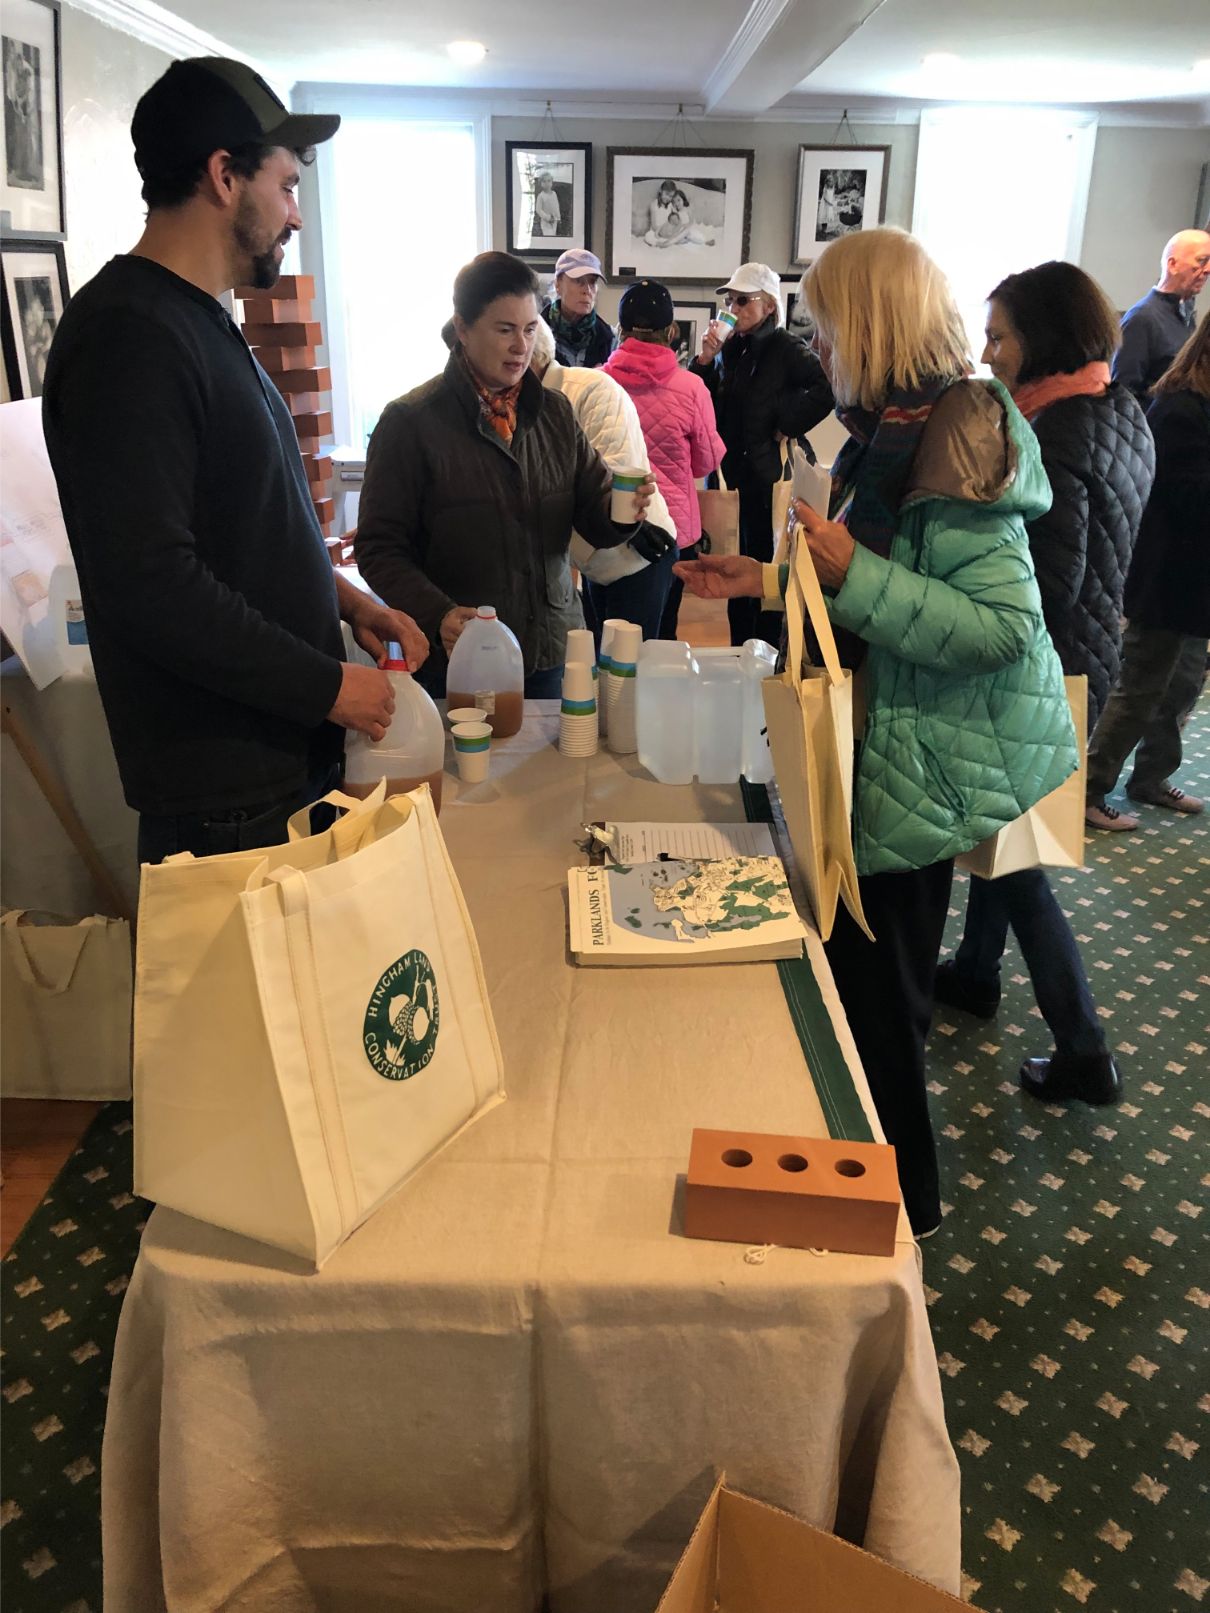 Event ended with reusable goodie bags and cider at Hingham Community Center